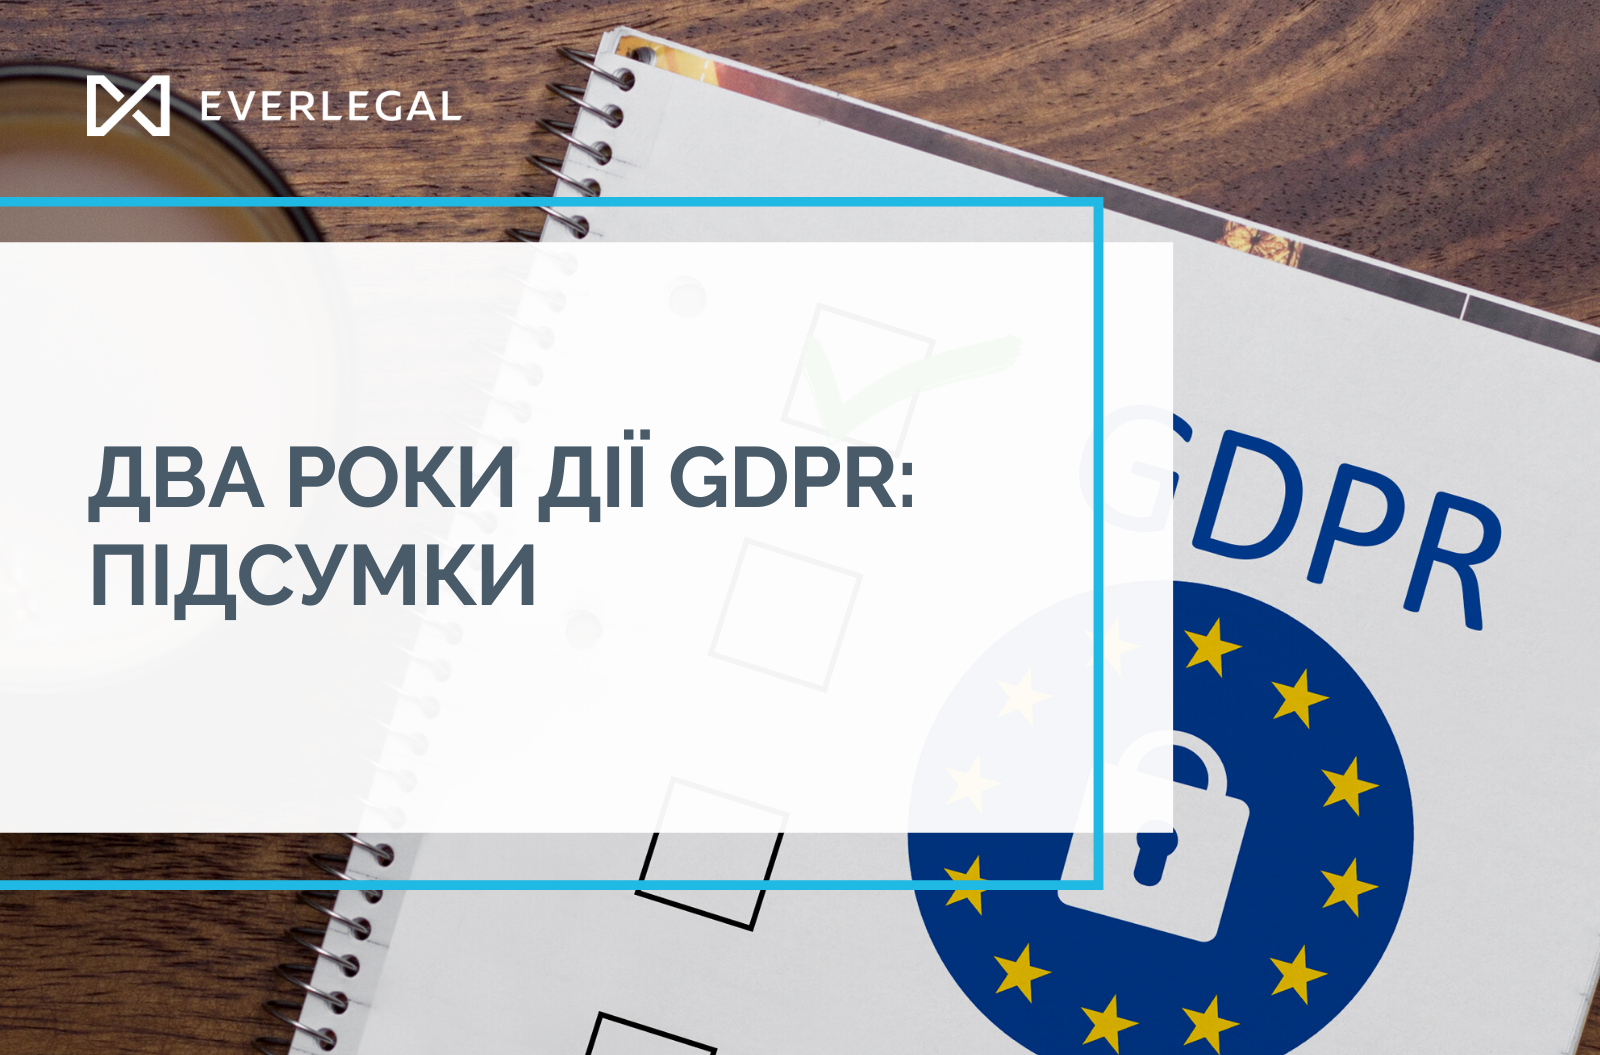 Two years of GDPR in action: the results